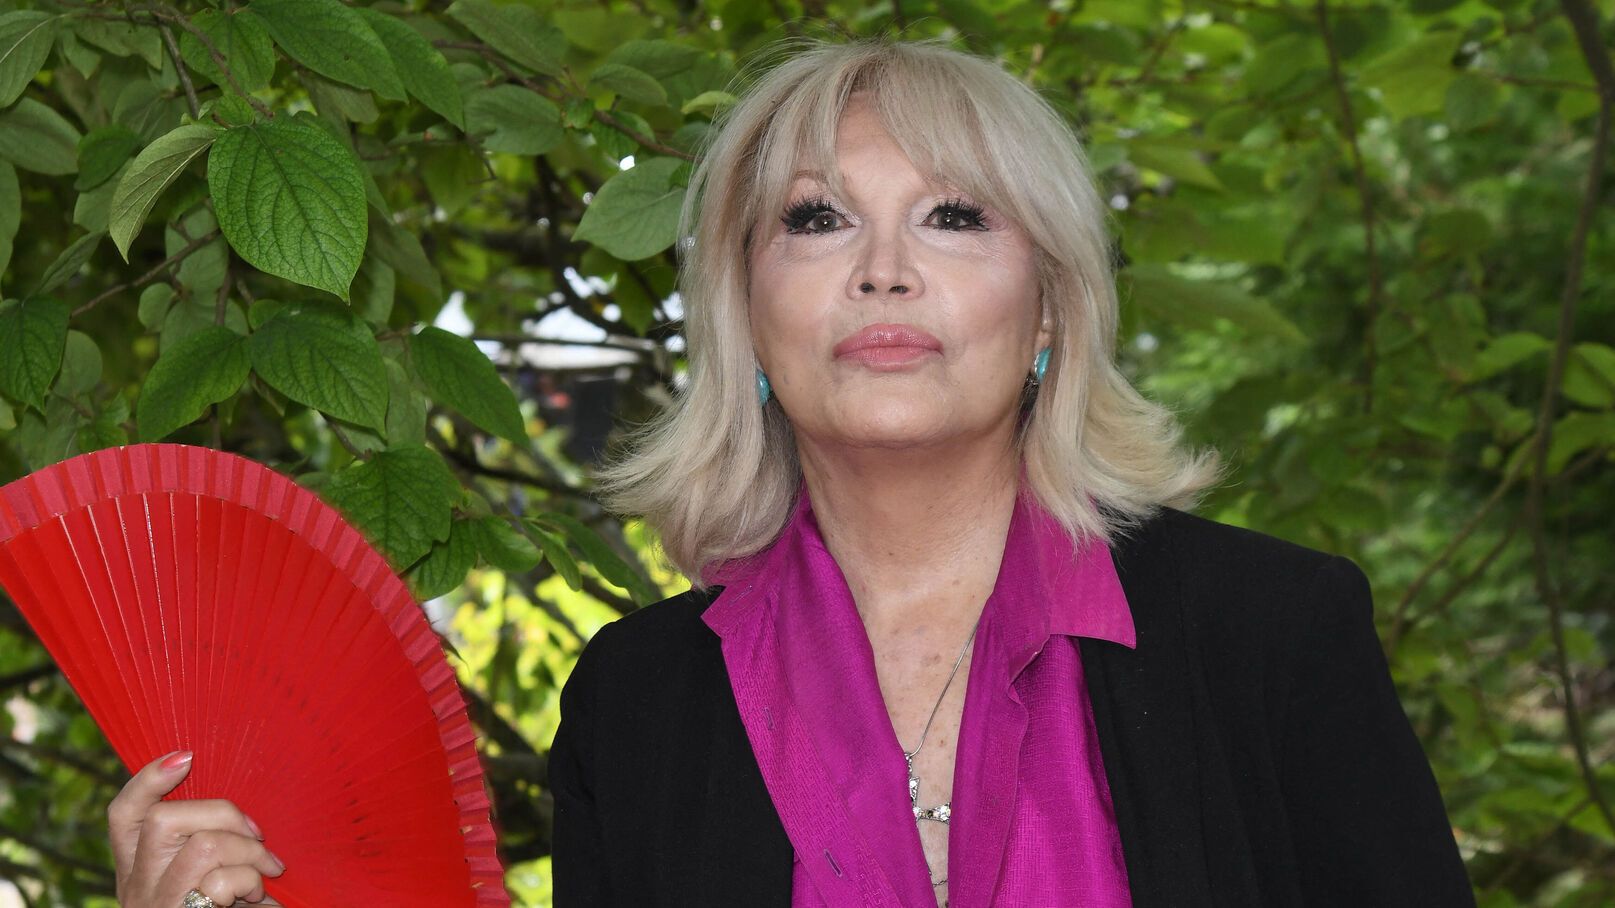 amanda-lear-hospitalisee-pour-une-lourde-operation-chirurgicale